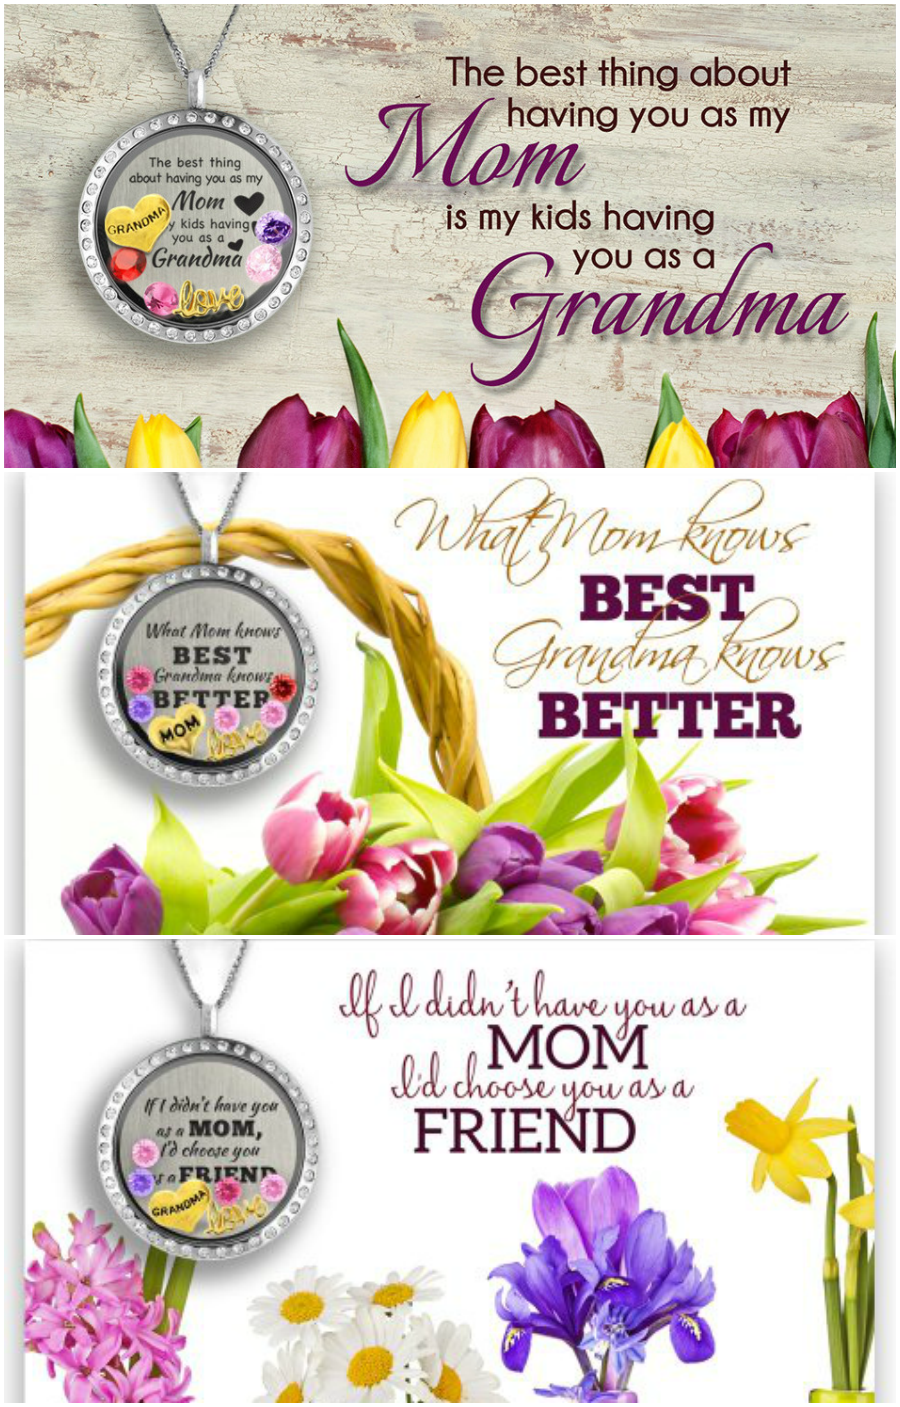 Heartwarming sayings on card & locket set. Gift Guide: Gifts for Grandparents @HomeLifeAbroad.com #holidaygiftguide #gifts #grandparents #grandma #grandpa